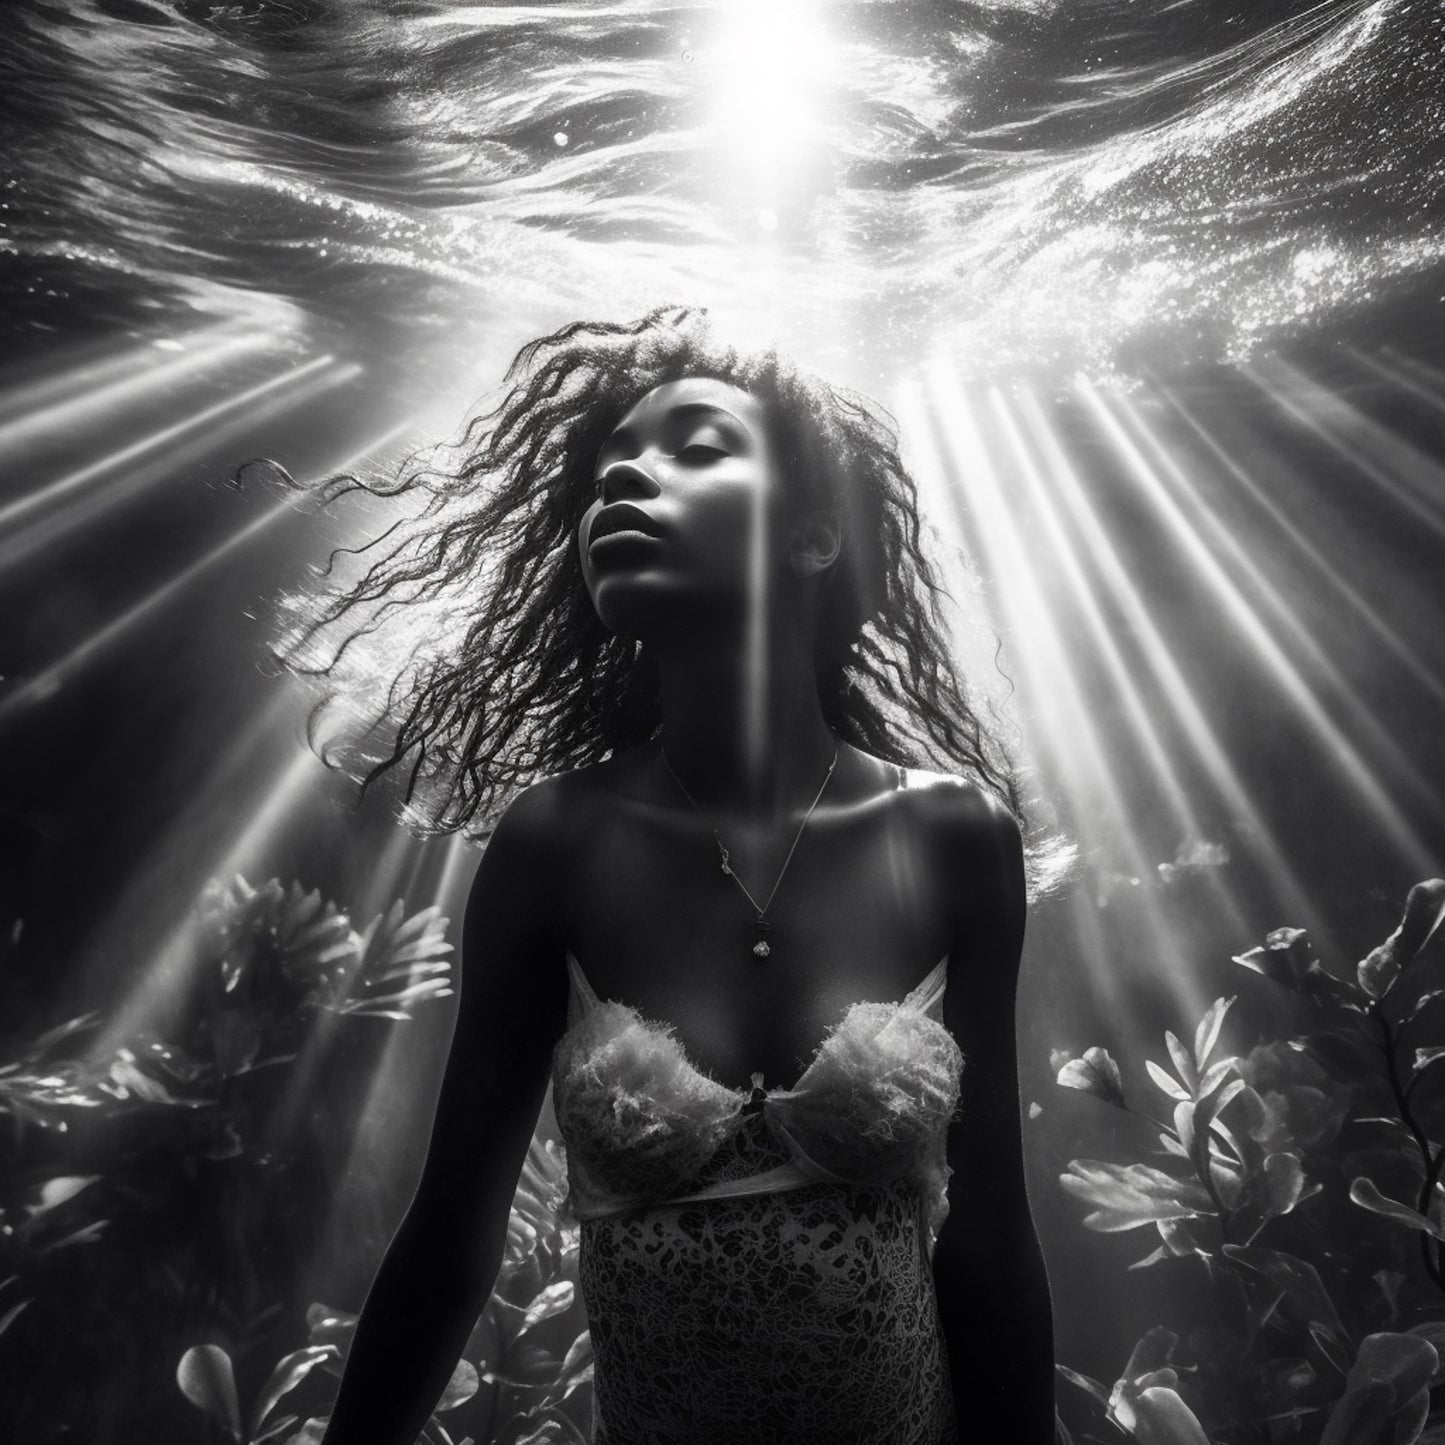 A mermaid gracefully ascending toward the surface, from the Siren Song Mermaid Collection, captured in a stunning black and white fine art print.